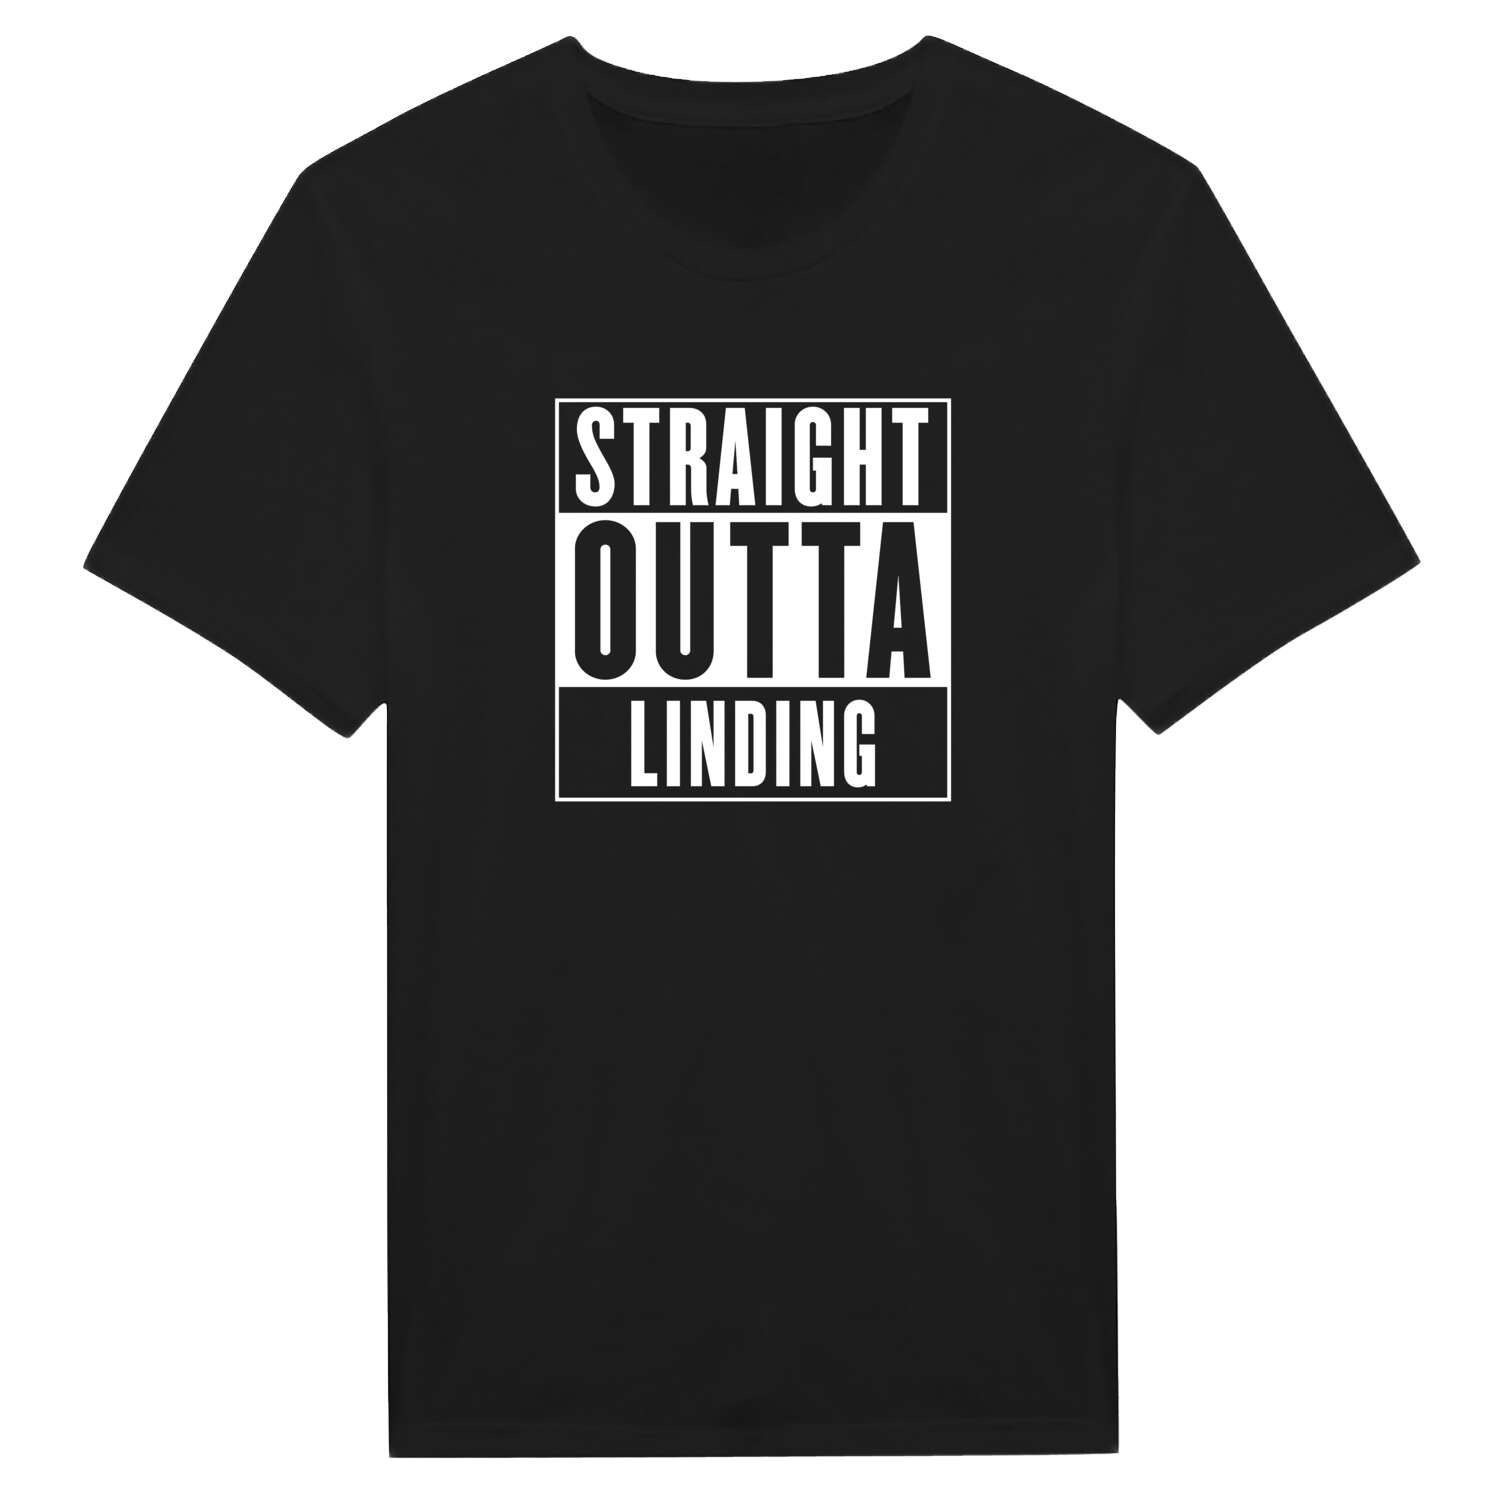 Linding T-Shirt »Straight Outta«